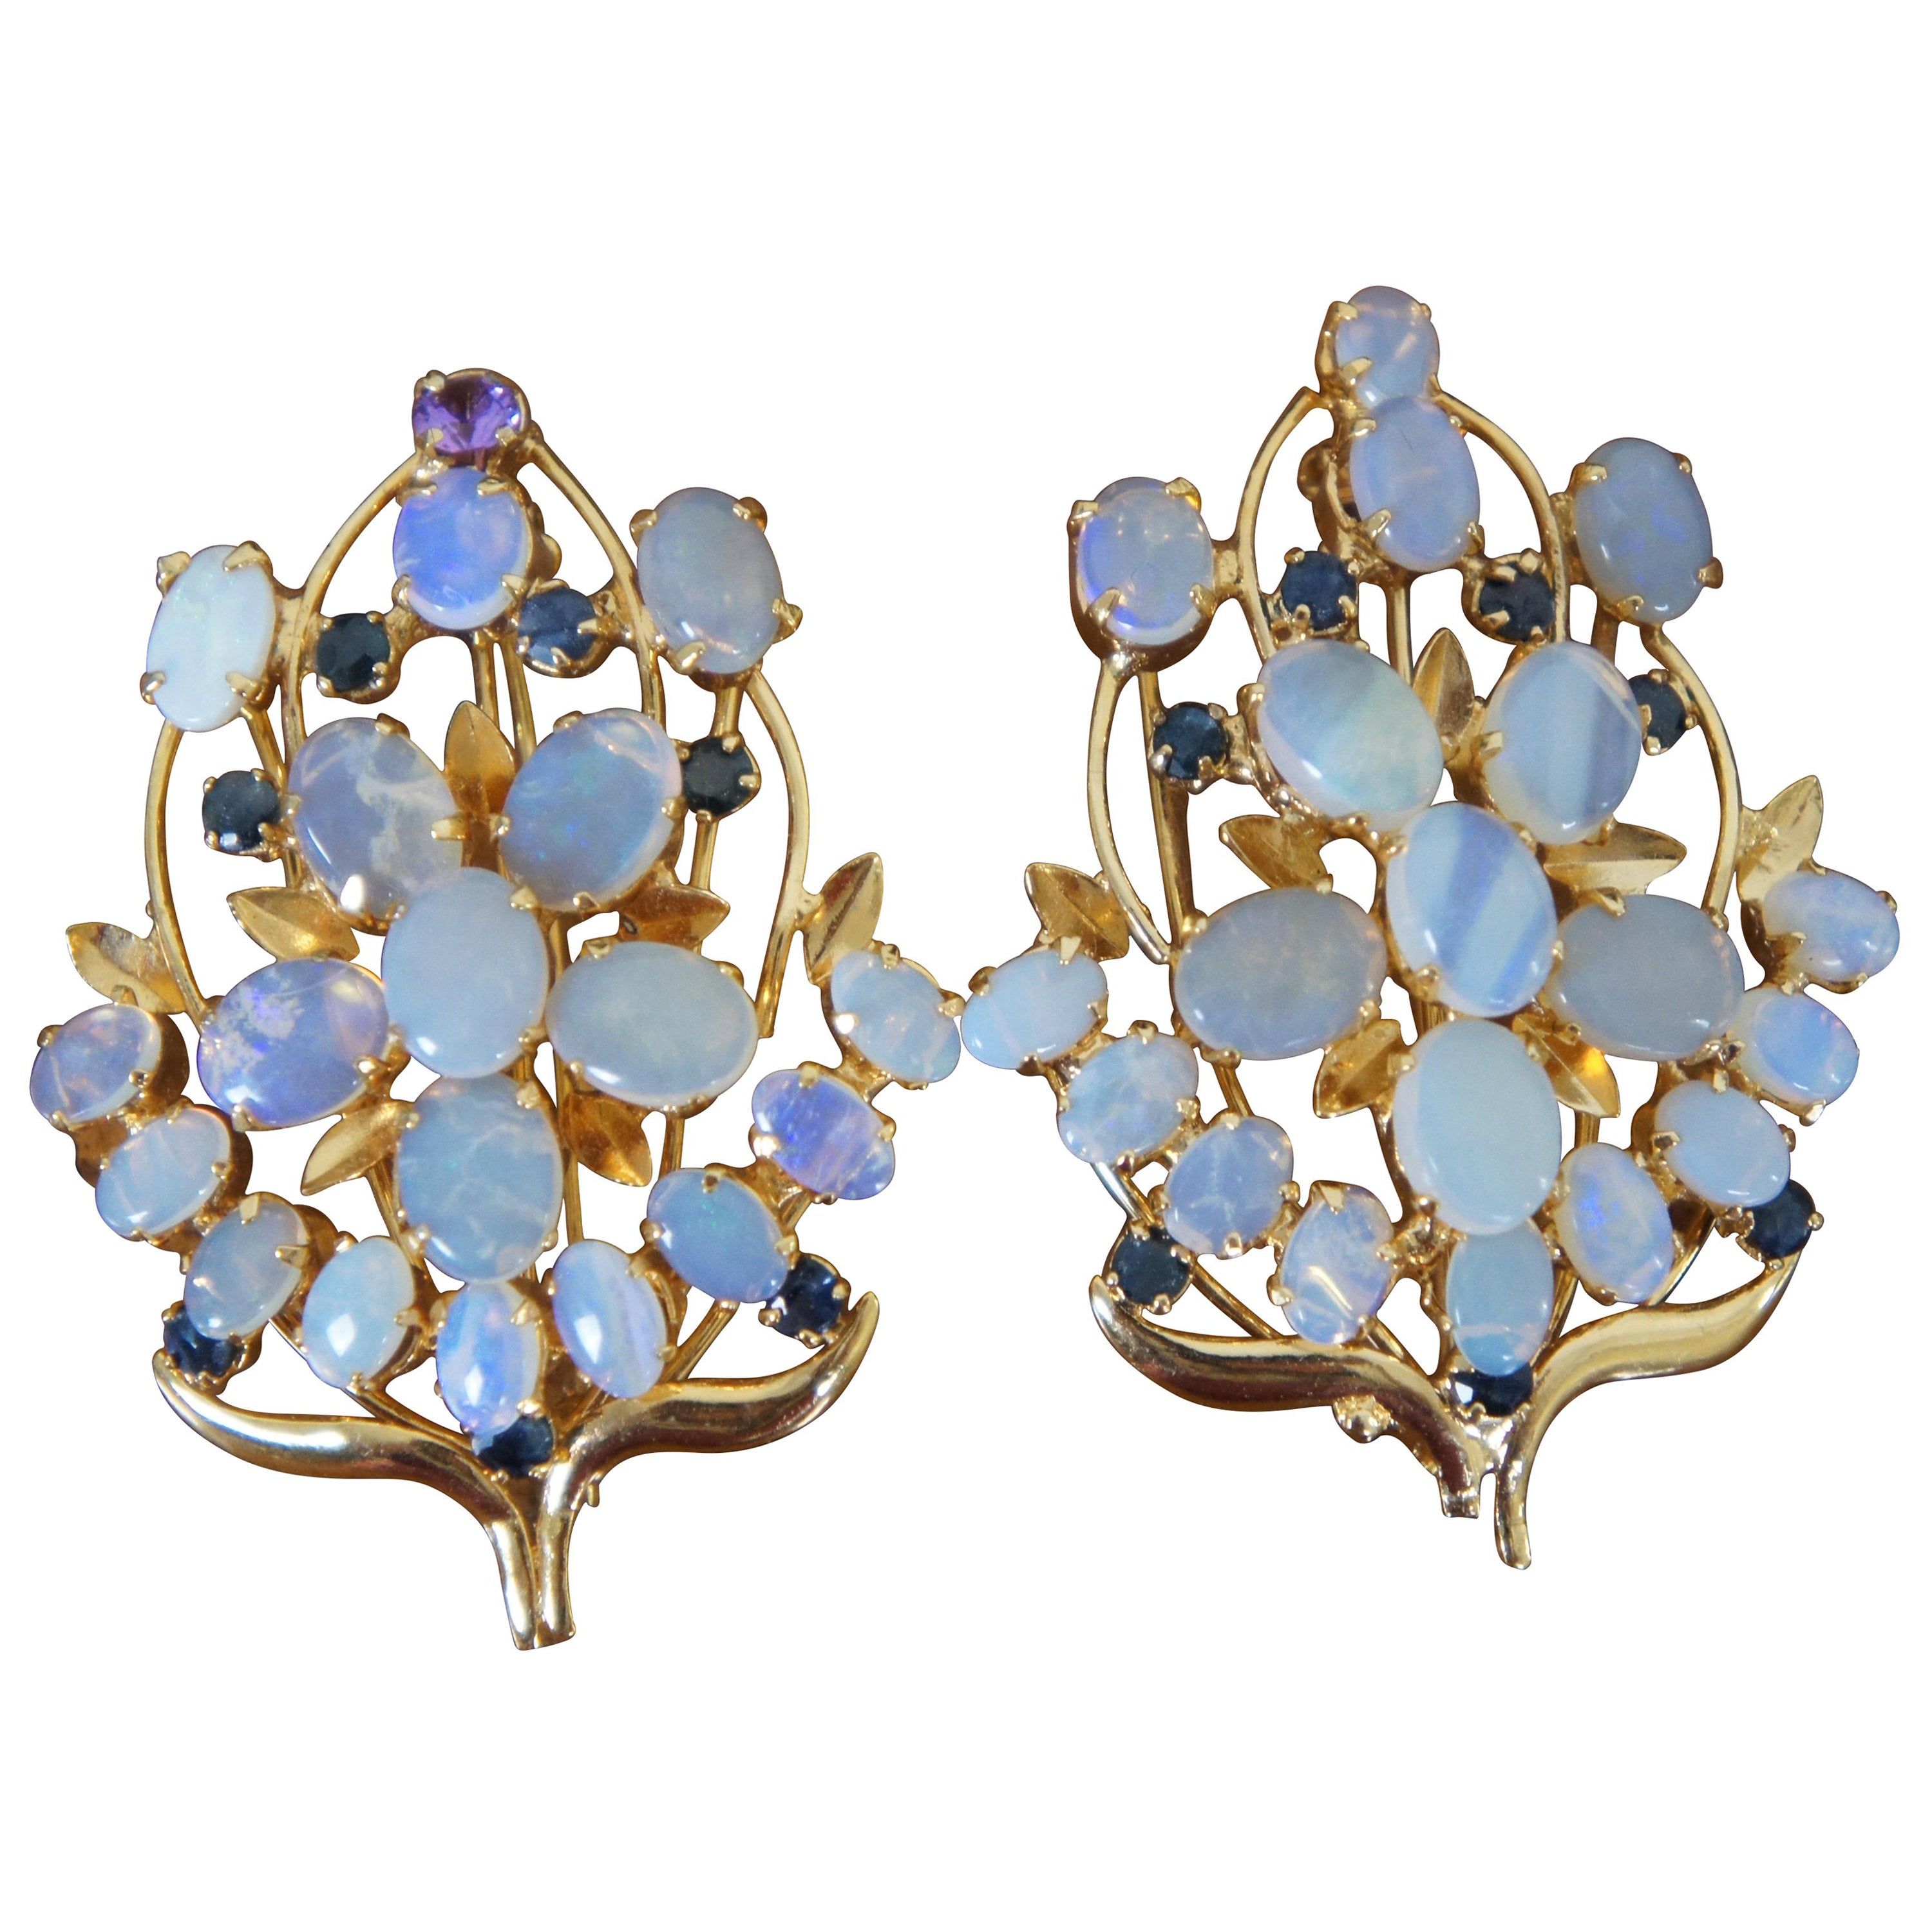 2 Midcentury Gold Tone Opal & Sapphire Floral Cluster Brooch Pendant Pins 2" For Sale